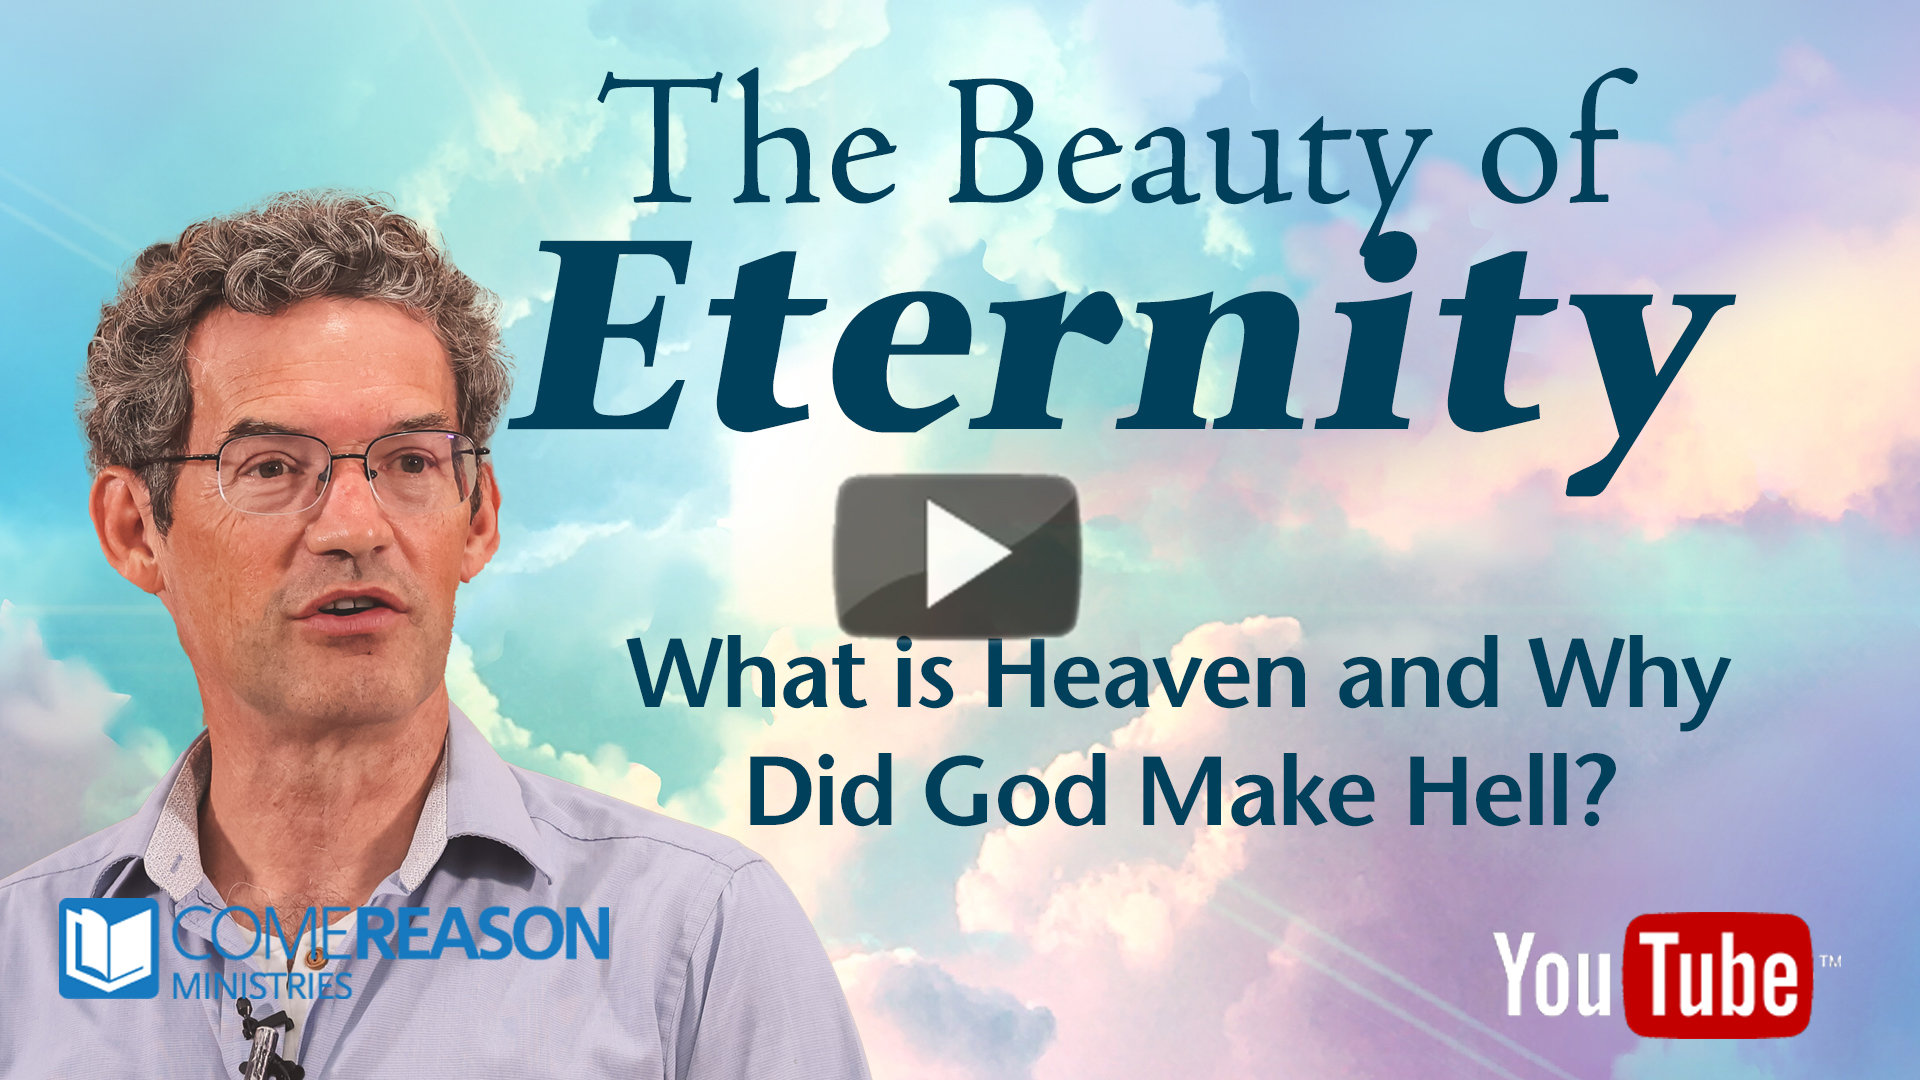 The Beauty of Eternity: What is Heaven and Why Did God Make Hell?